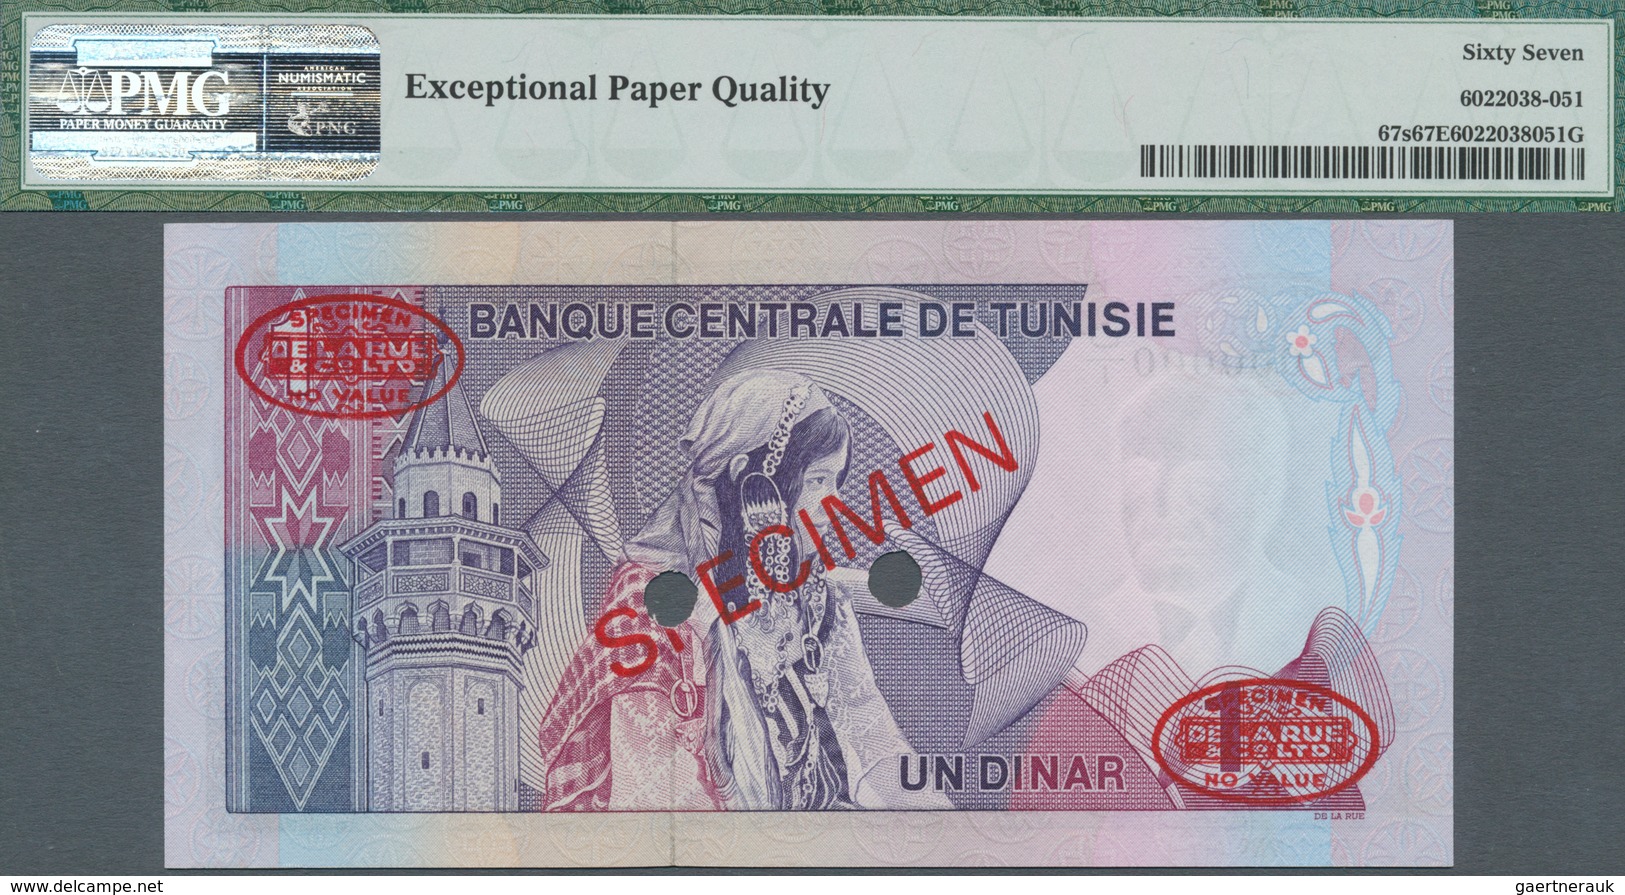 Tunisia / Tunisien: Set Of 3 Notes 1/2, 1 And 5 Dinars 1972 Specimen P. 66s-68s, All PMG Graded: 66G - Tusesië